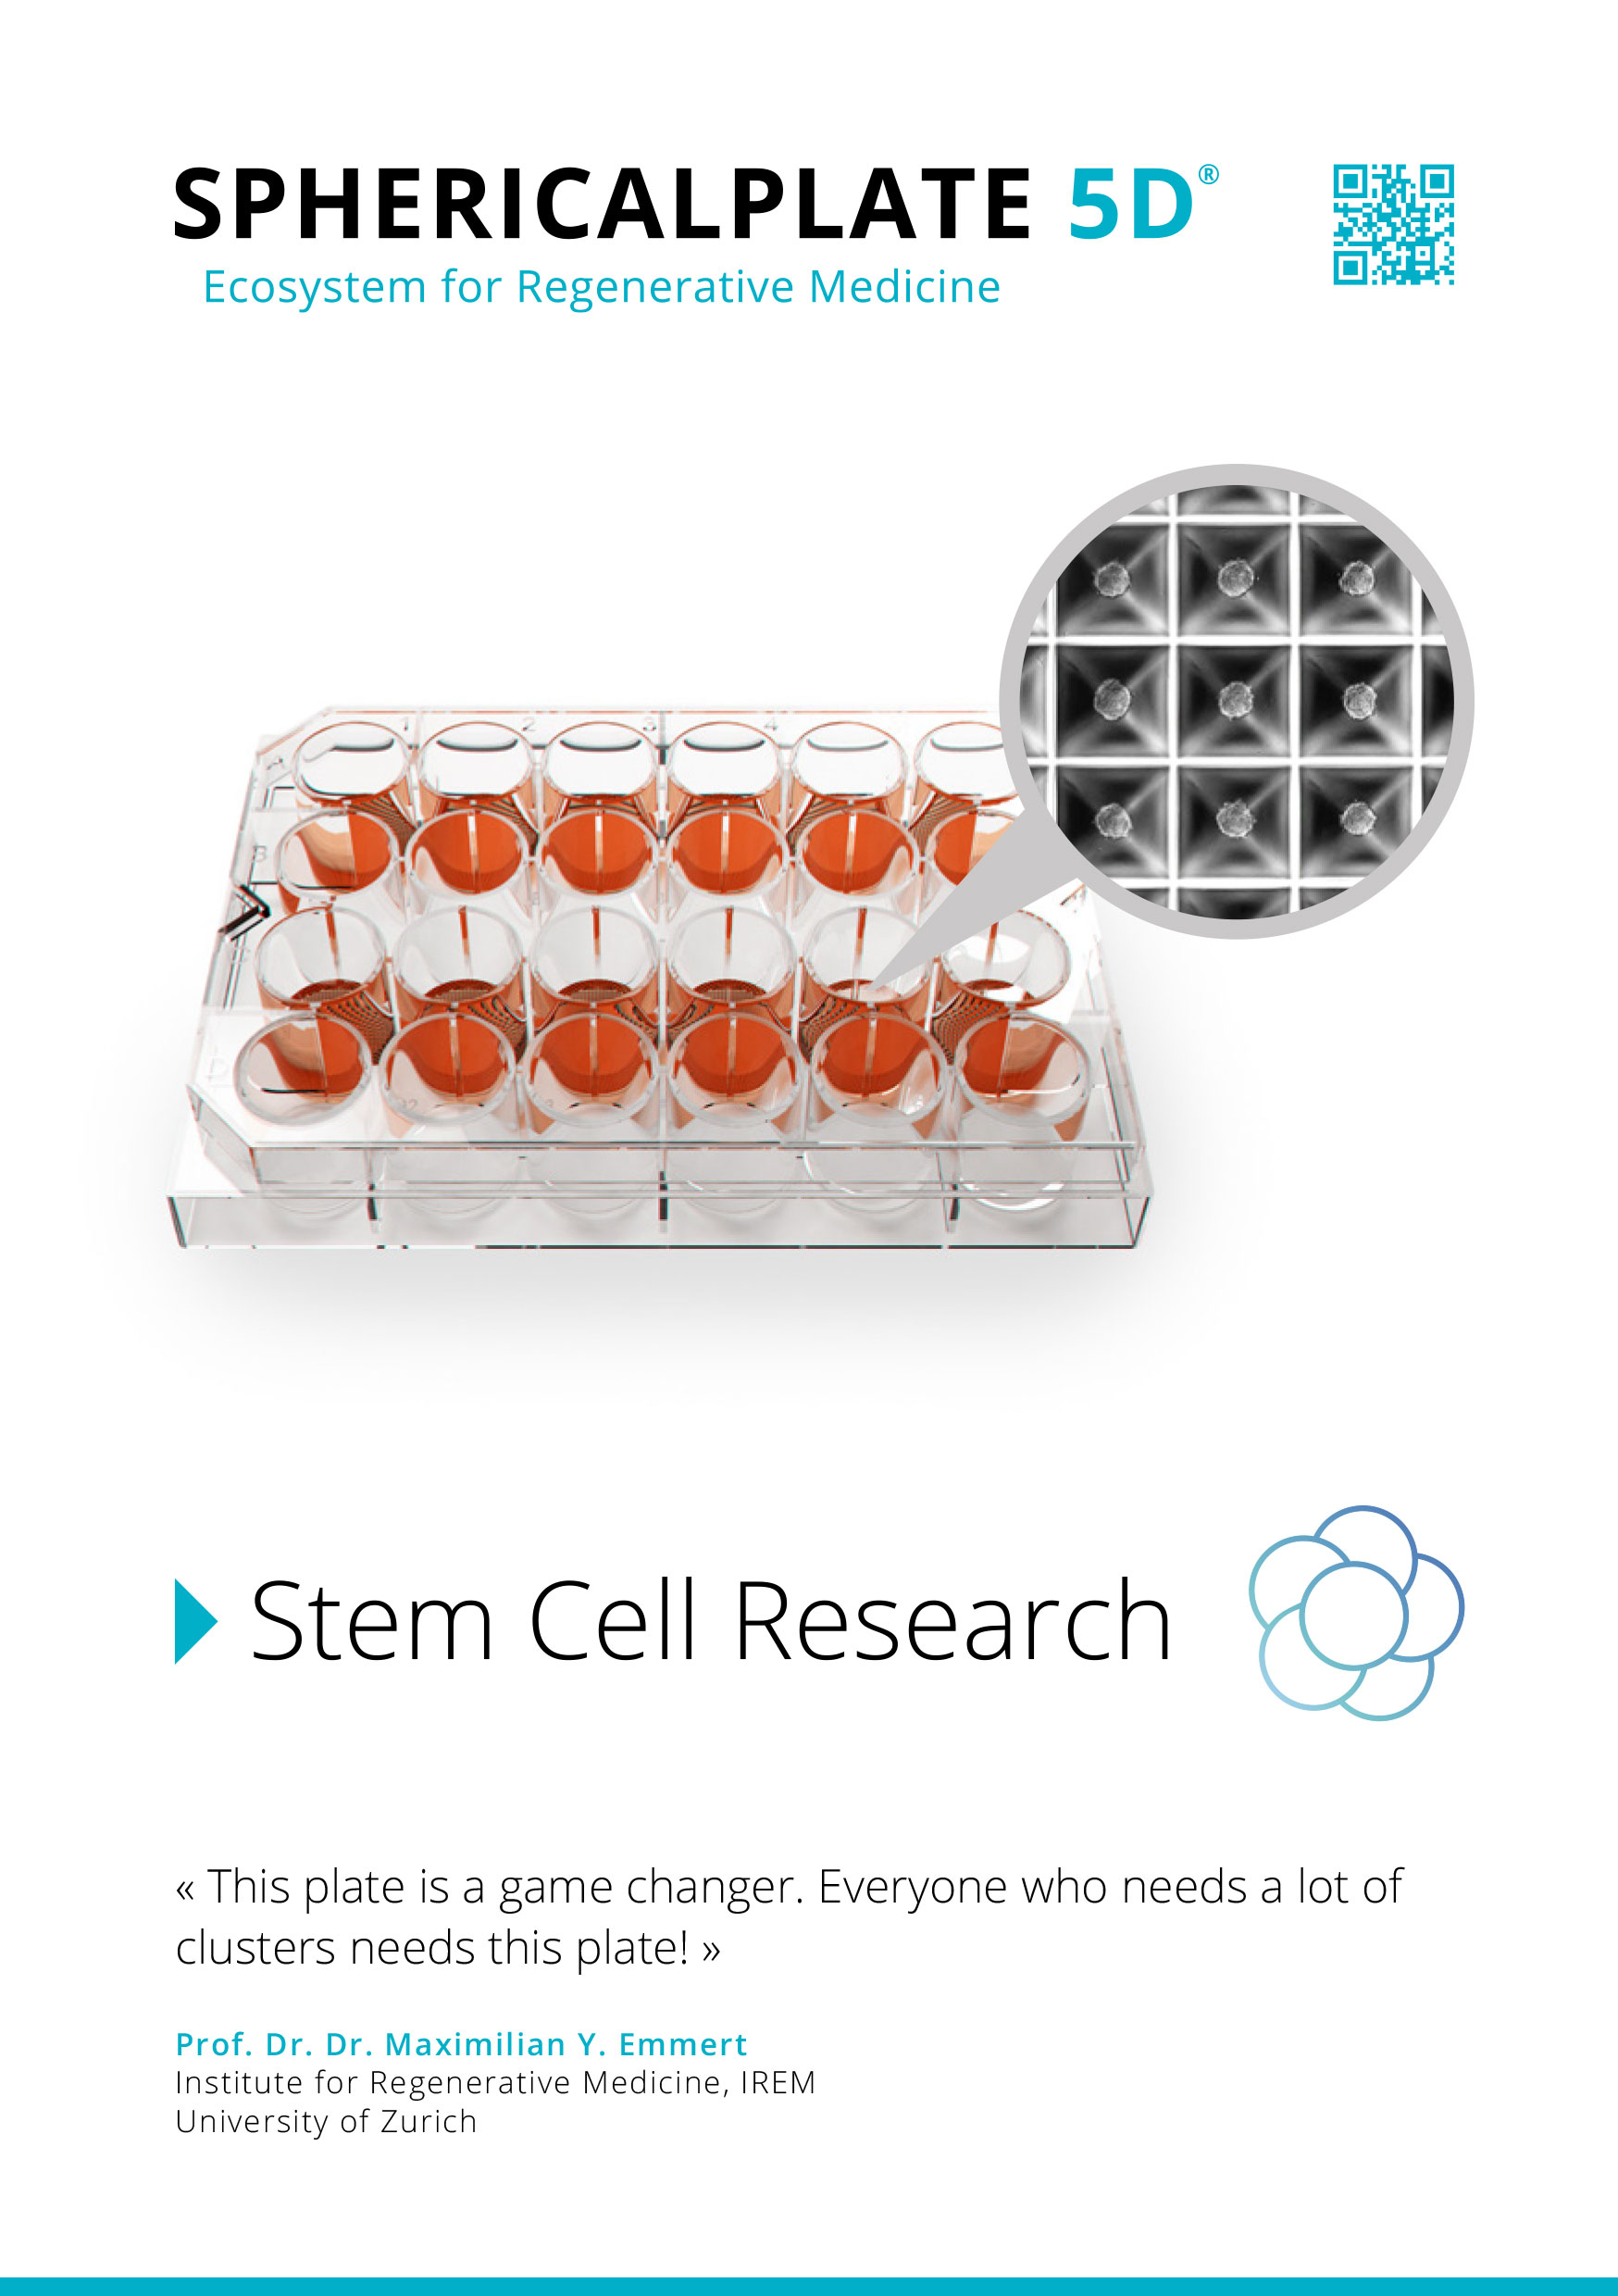 SP5D Stem Cell Research